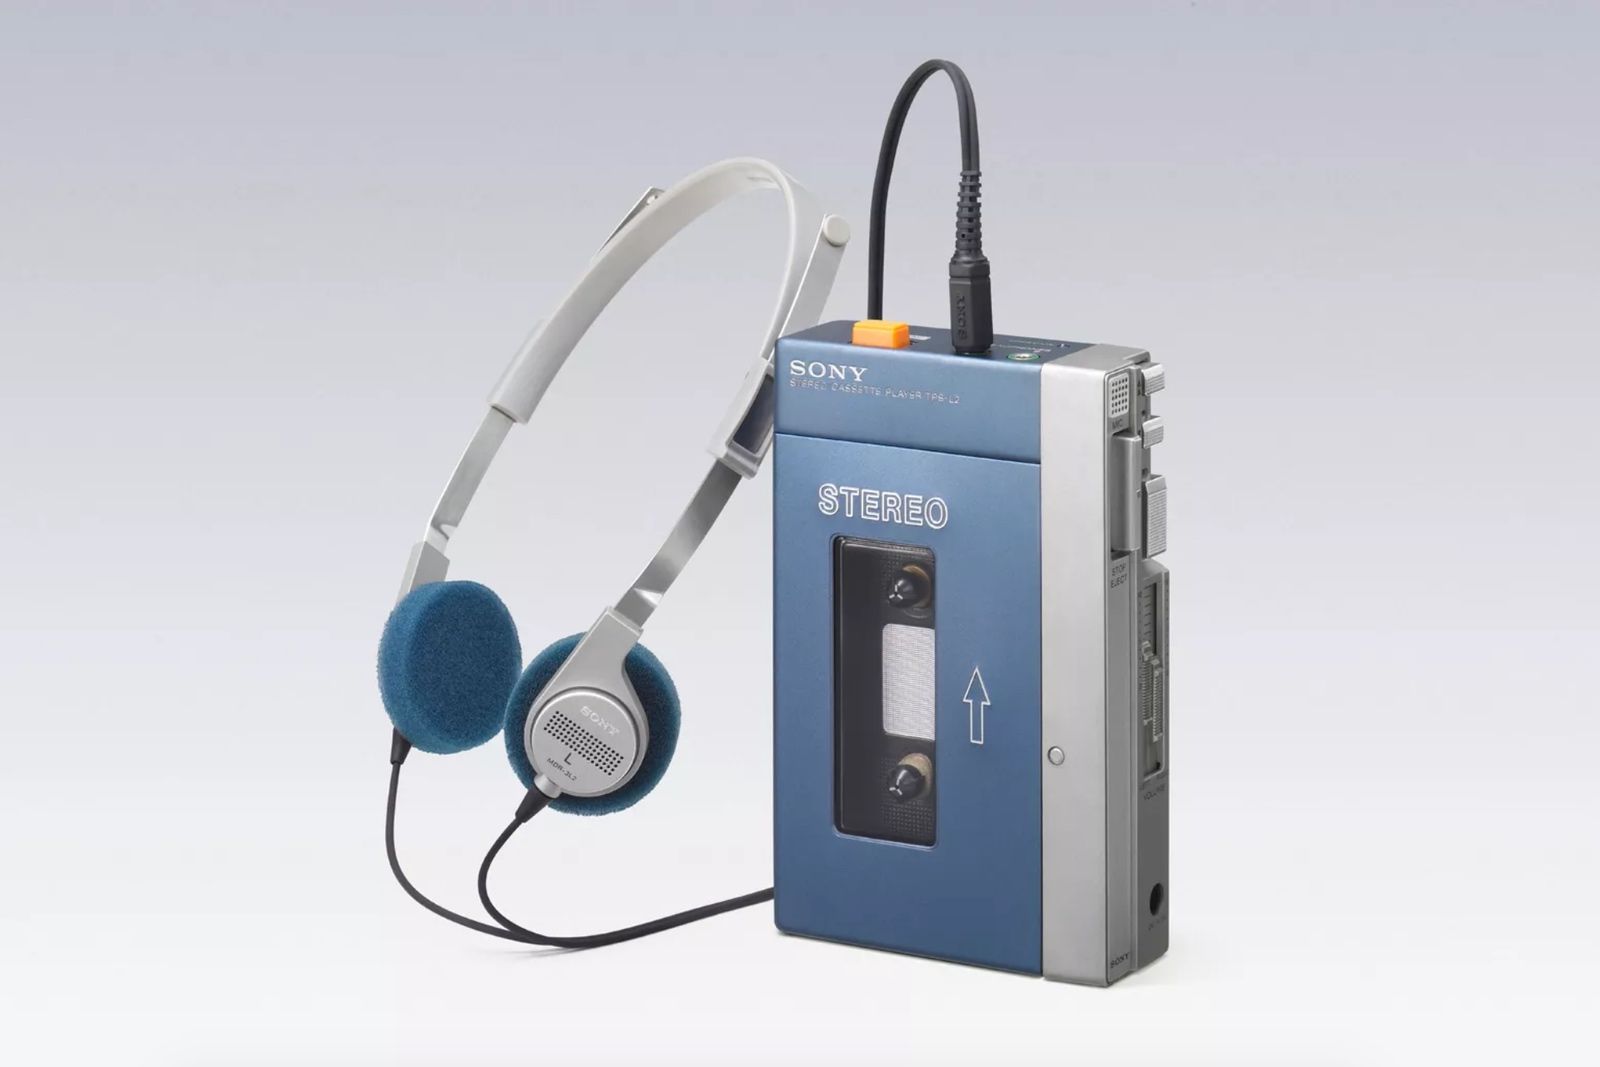 15 Iconic Sony Walkman designs from yesteryear Looking back at classic devices image 1